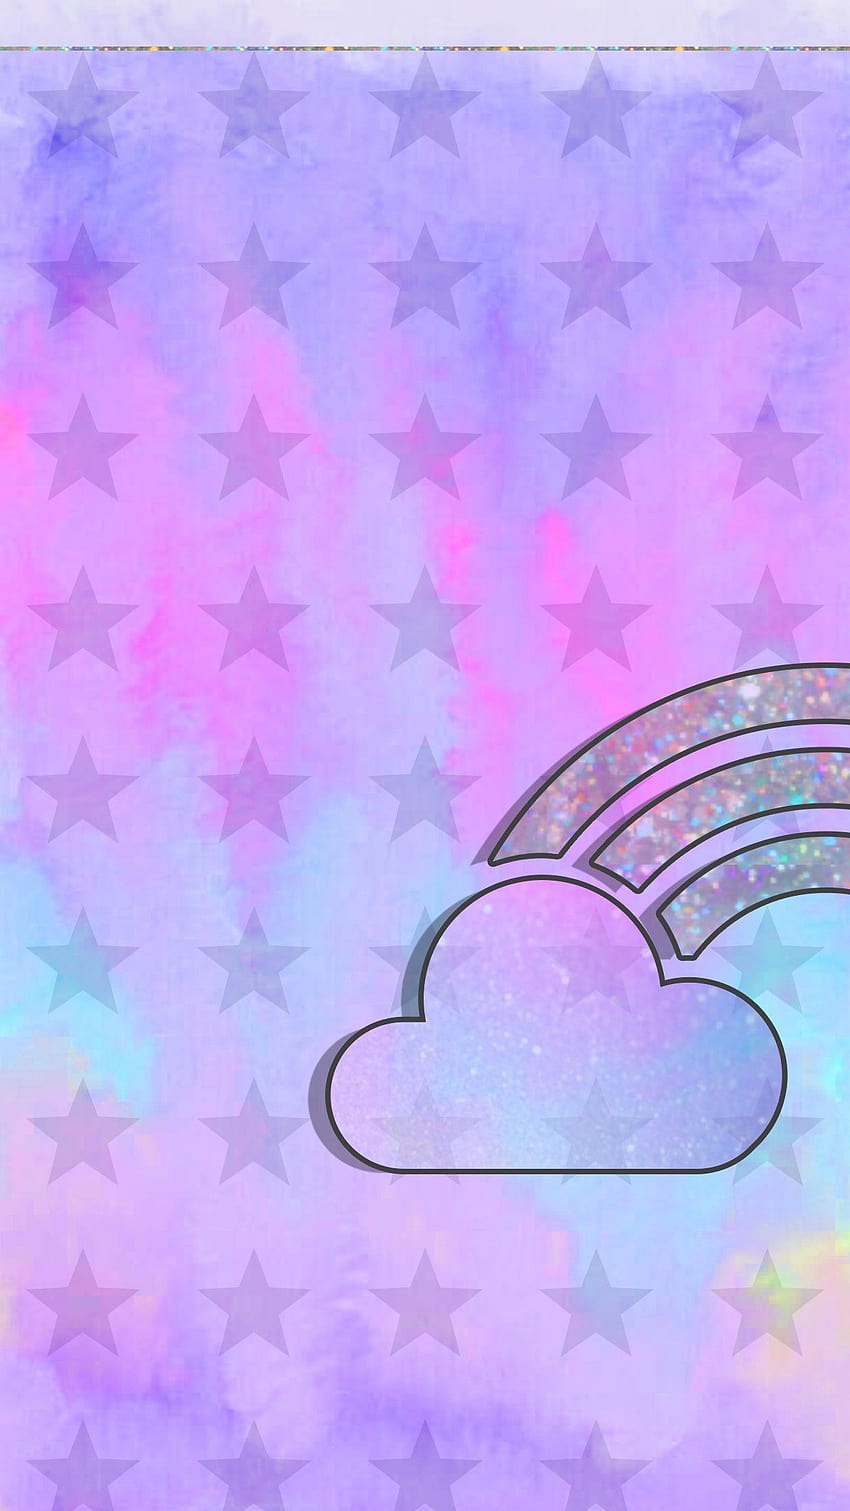 Cloud Cute Girly iPhone iPhone Android iridescent purple pink, iphone cute girly HD phone wallpaper